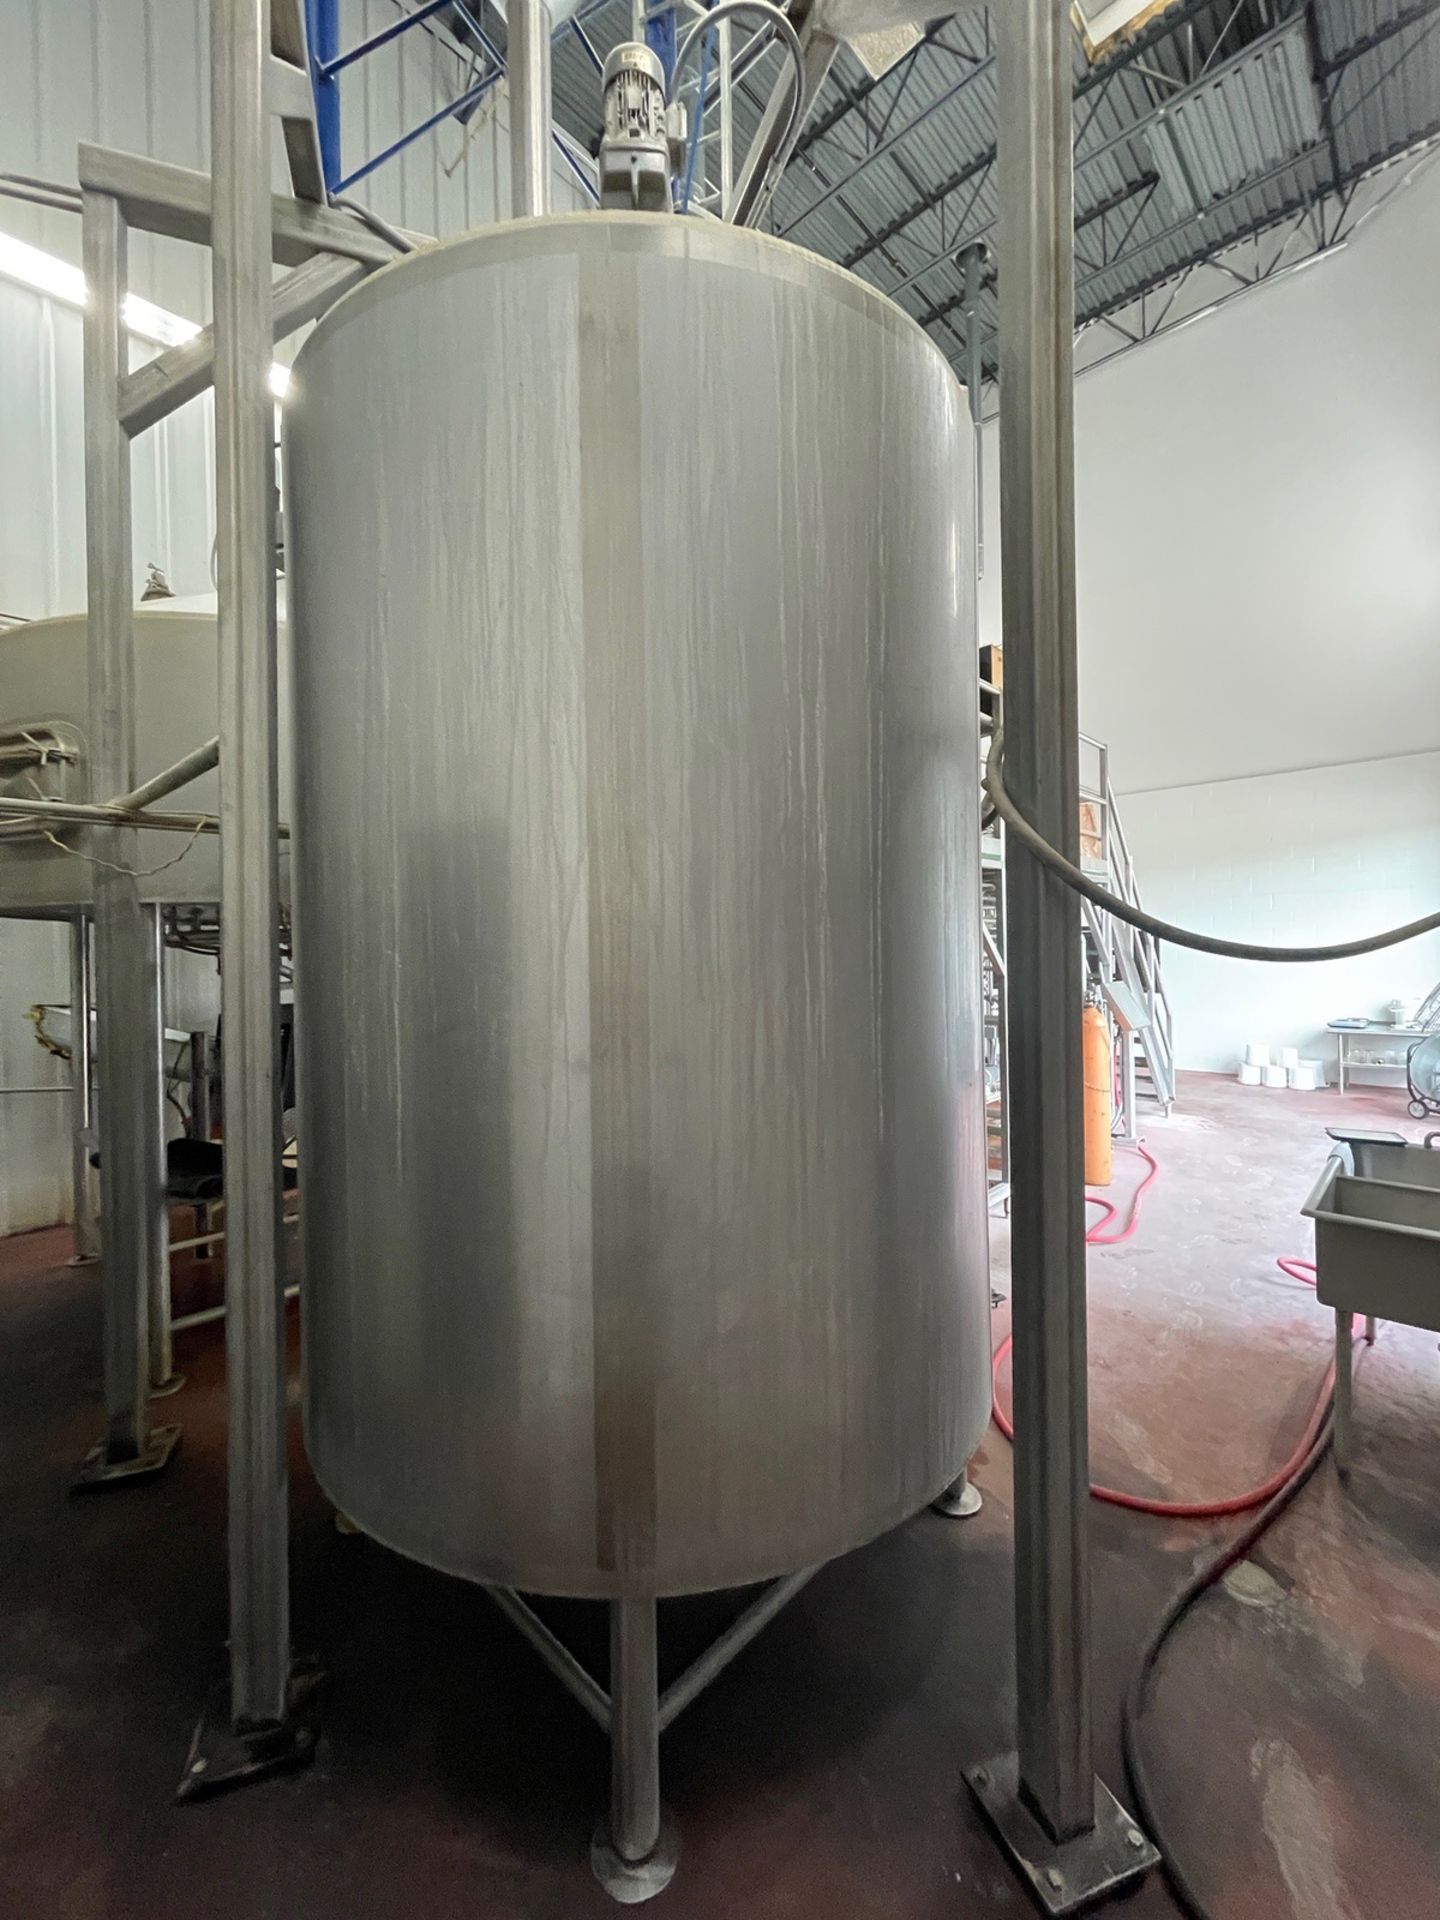 2012 Sprinkman 30 BBL 5-Vessel Brewhouse, with Grain Mash Tun (33 BBLS, Approx. 6.5 | Rig Fee $16000 - Image 6 of 108